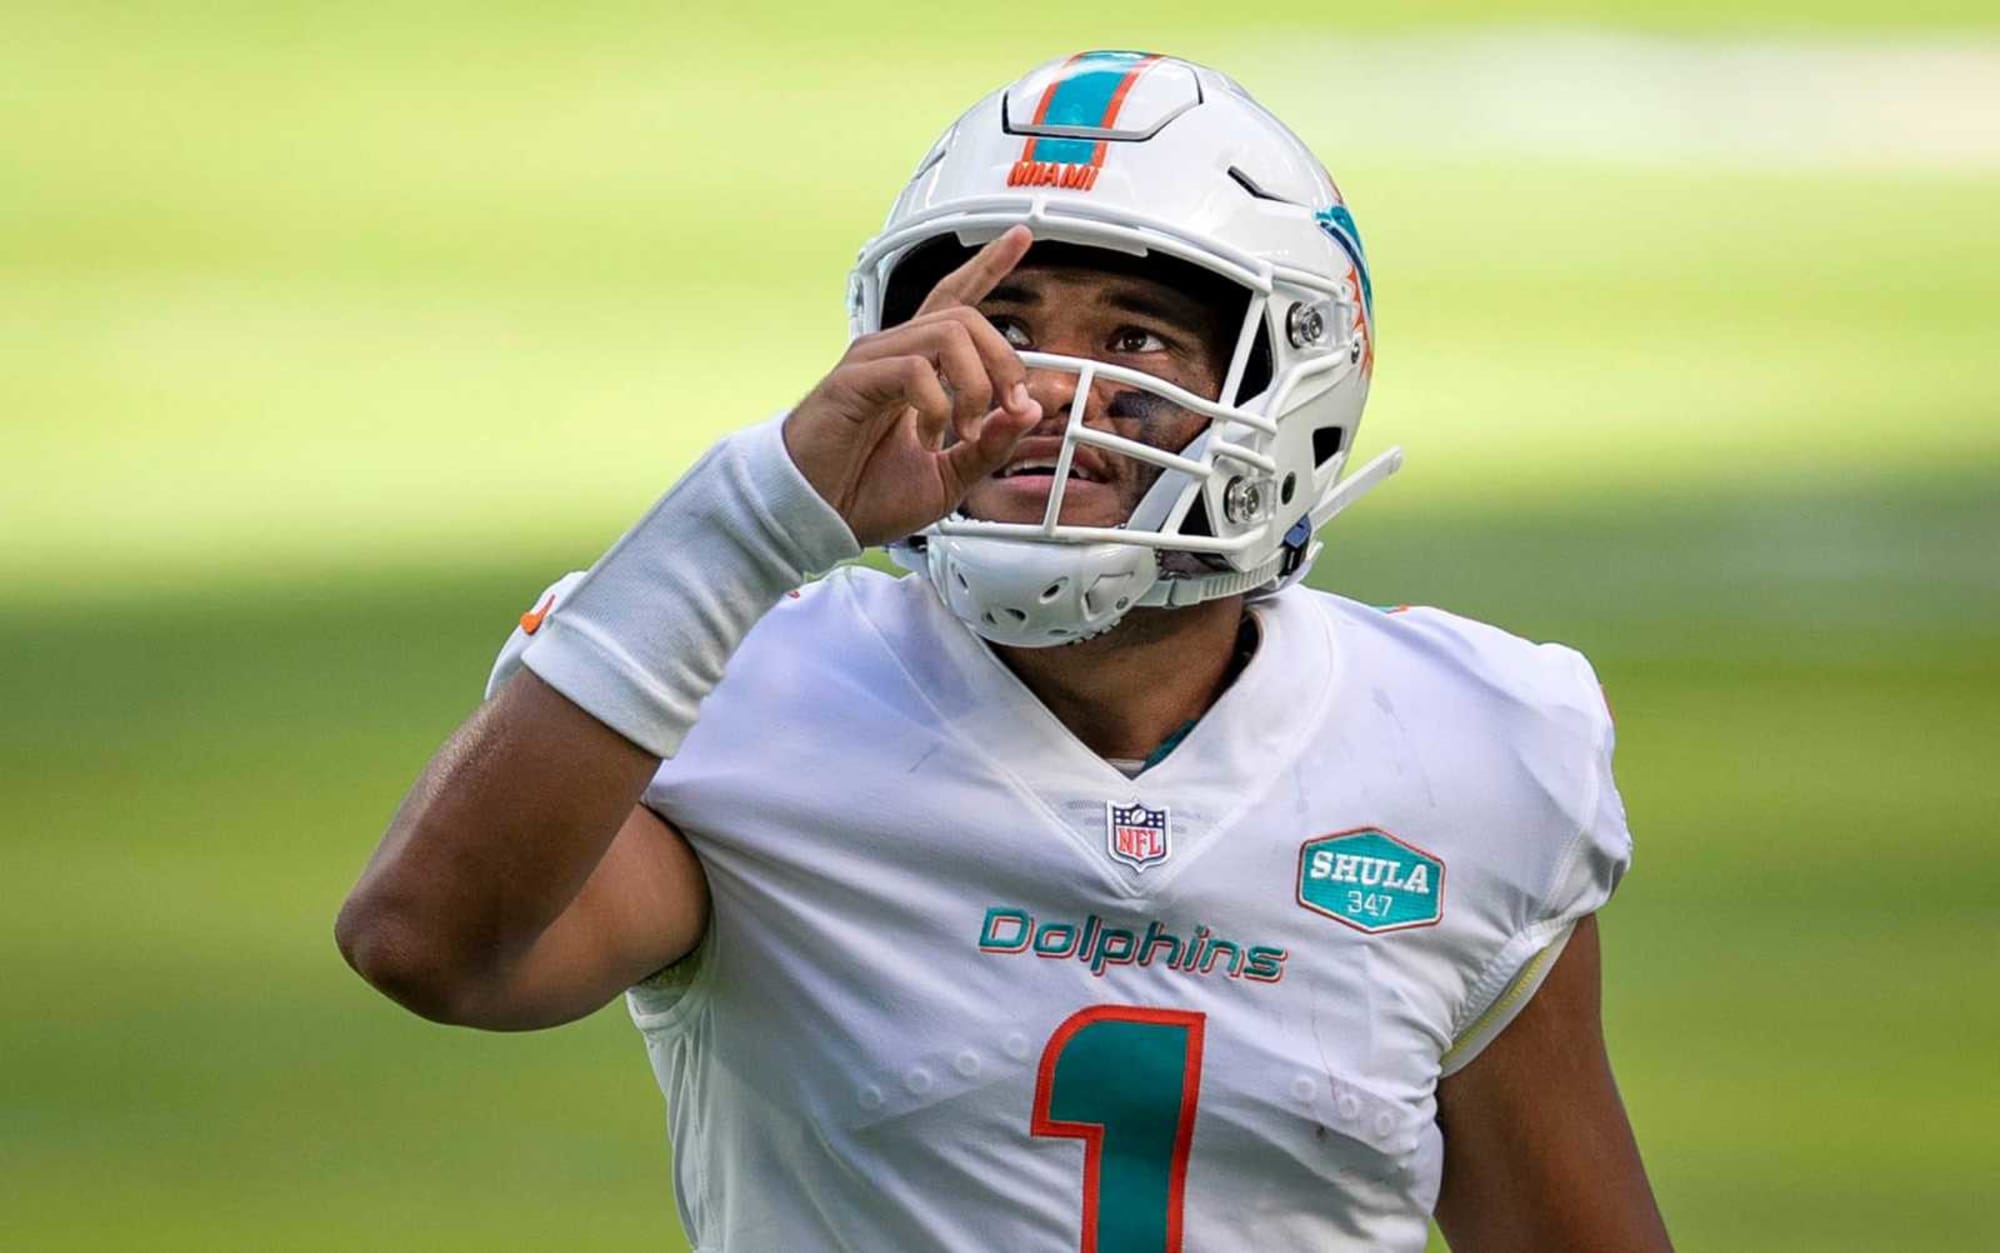 5 things we learned from Miami Dolphins QB Tua Tagovailoa on Sunday